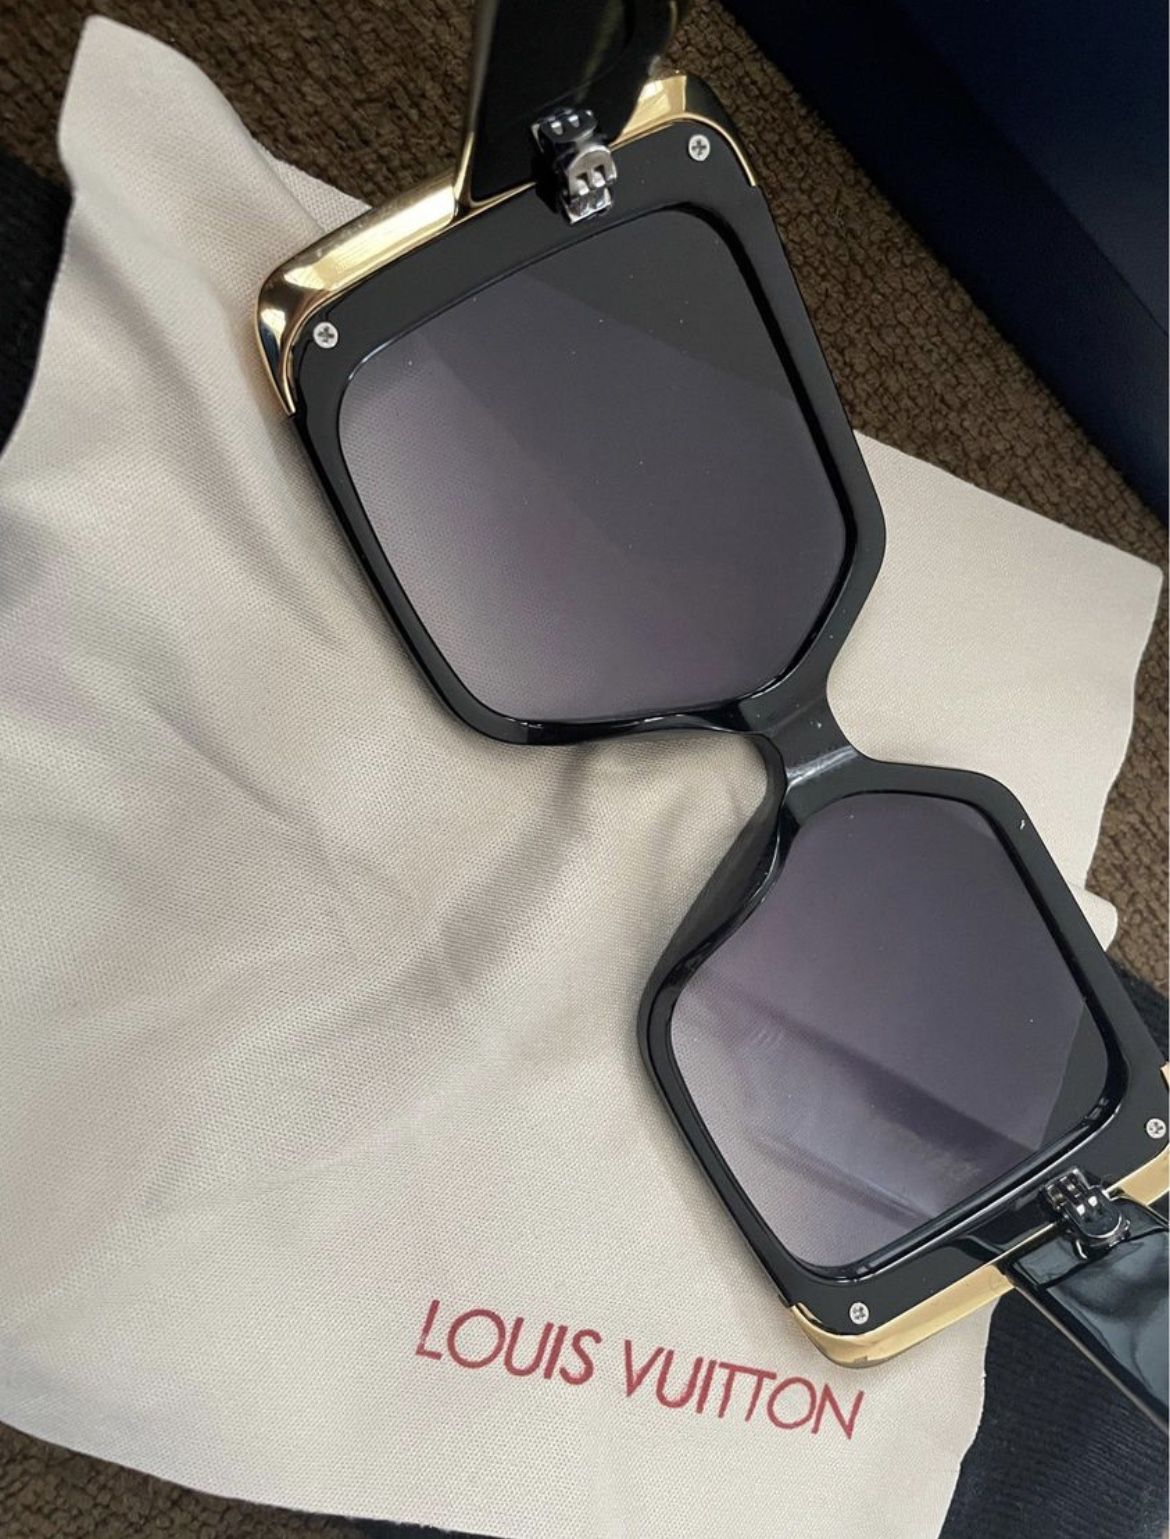 Louis Vuitton Sunglasses for Sale in Baltimore, MD - OfferUp